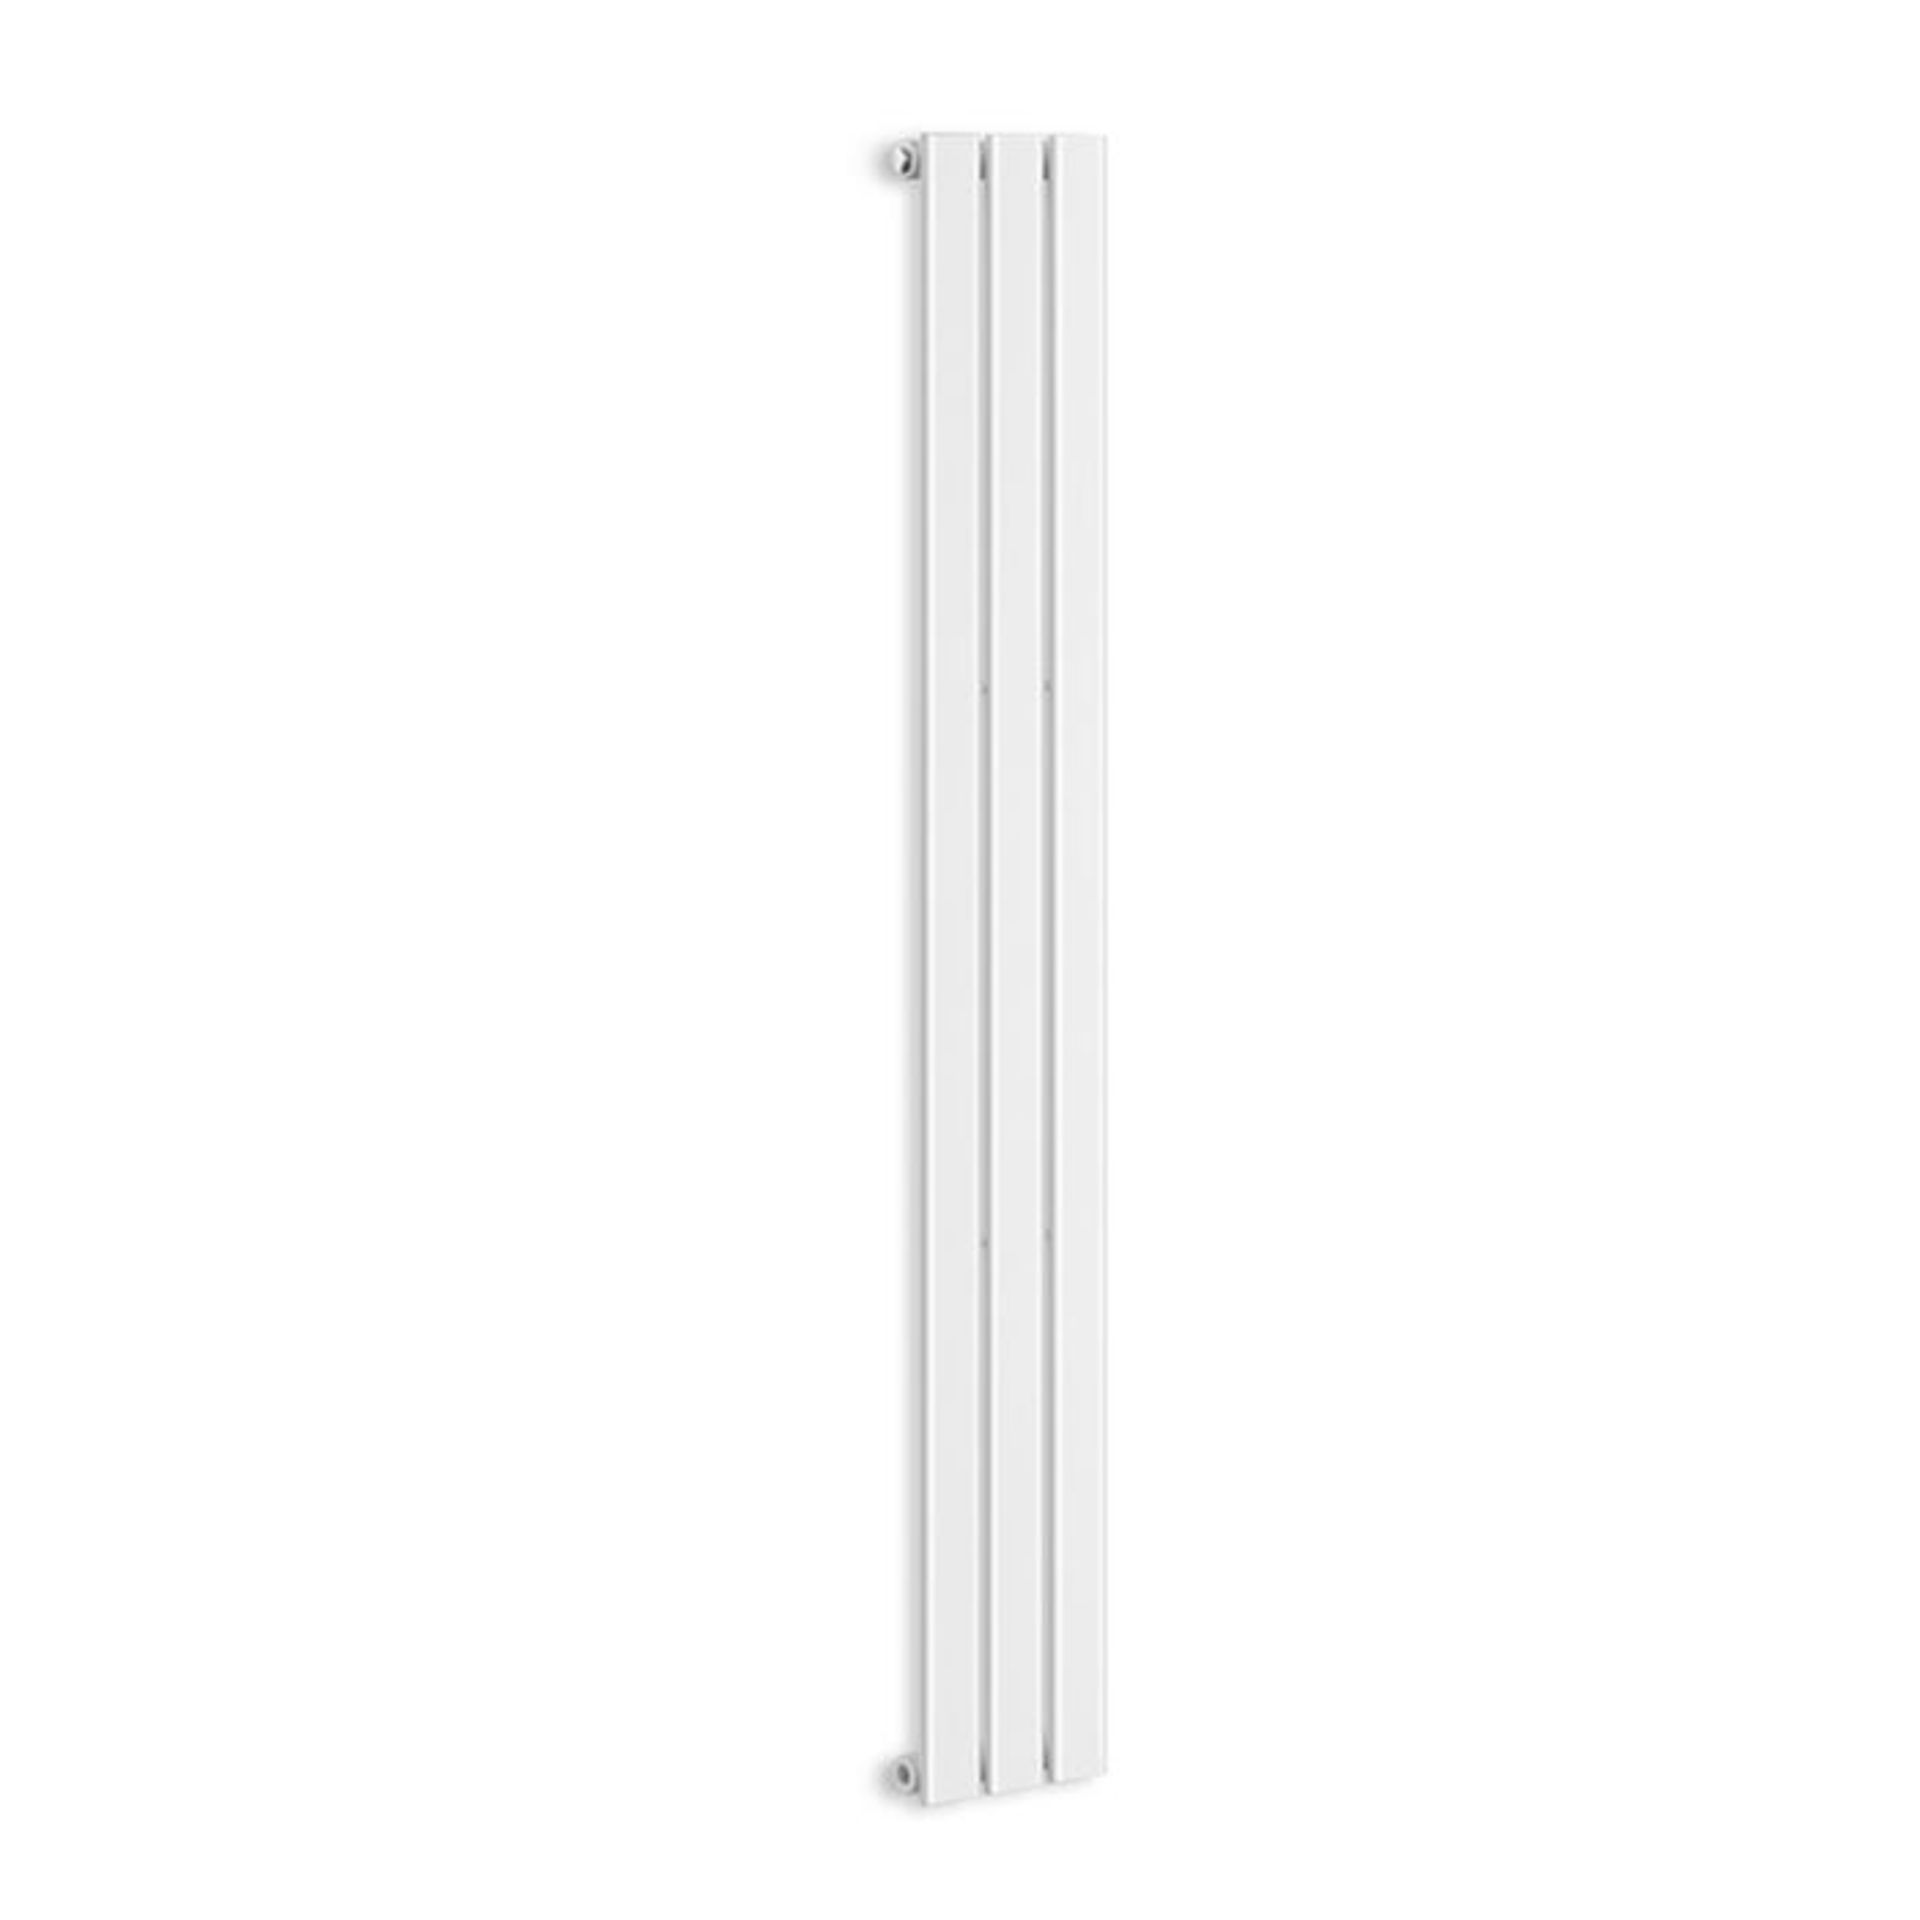 (MC199) 1600x228mm White Panel Vertical Radiator. RRP £209.00. Made from low carbon steel with aHigh